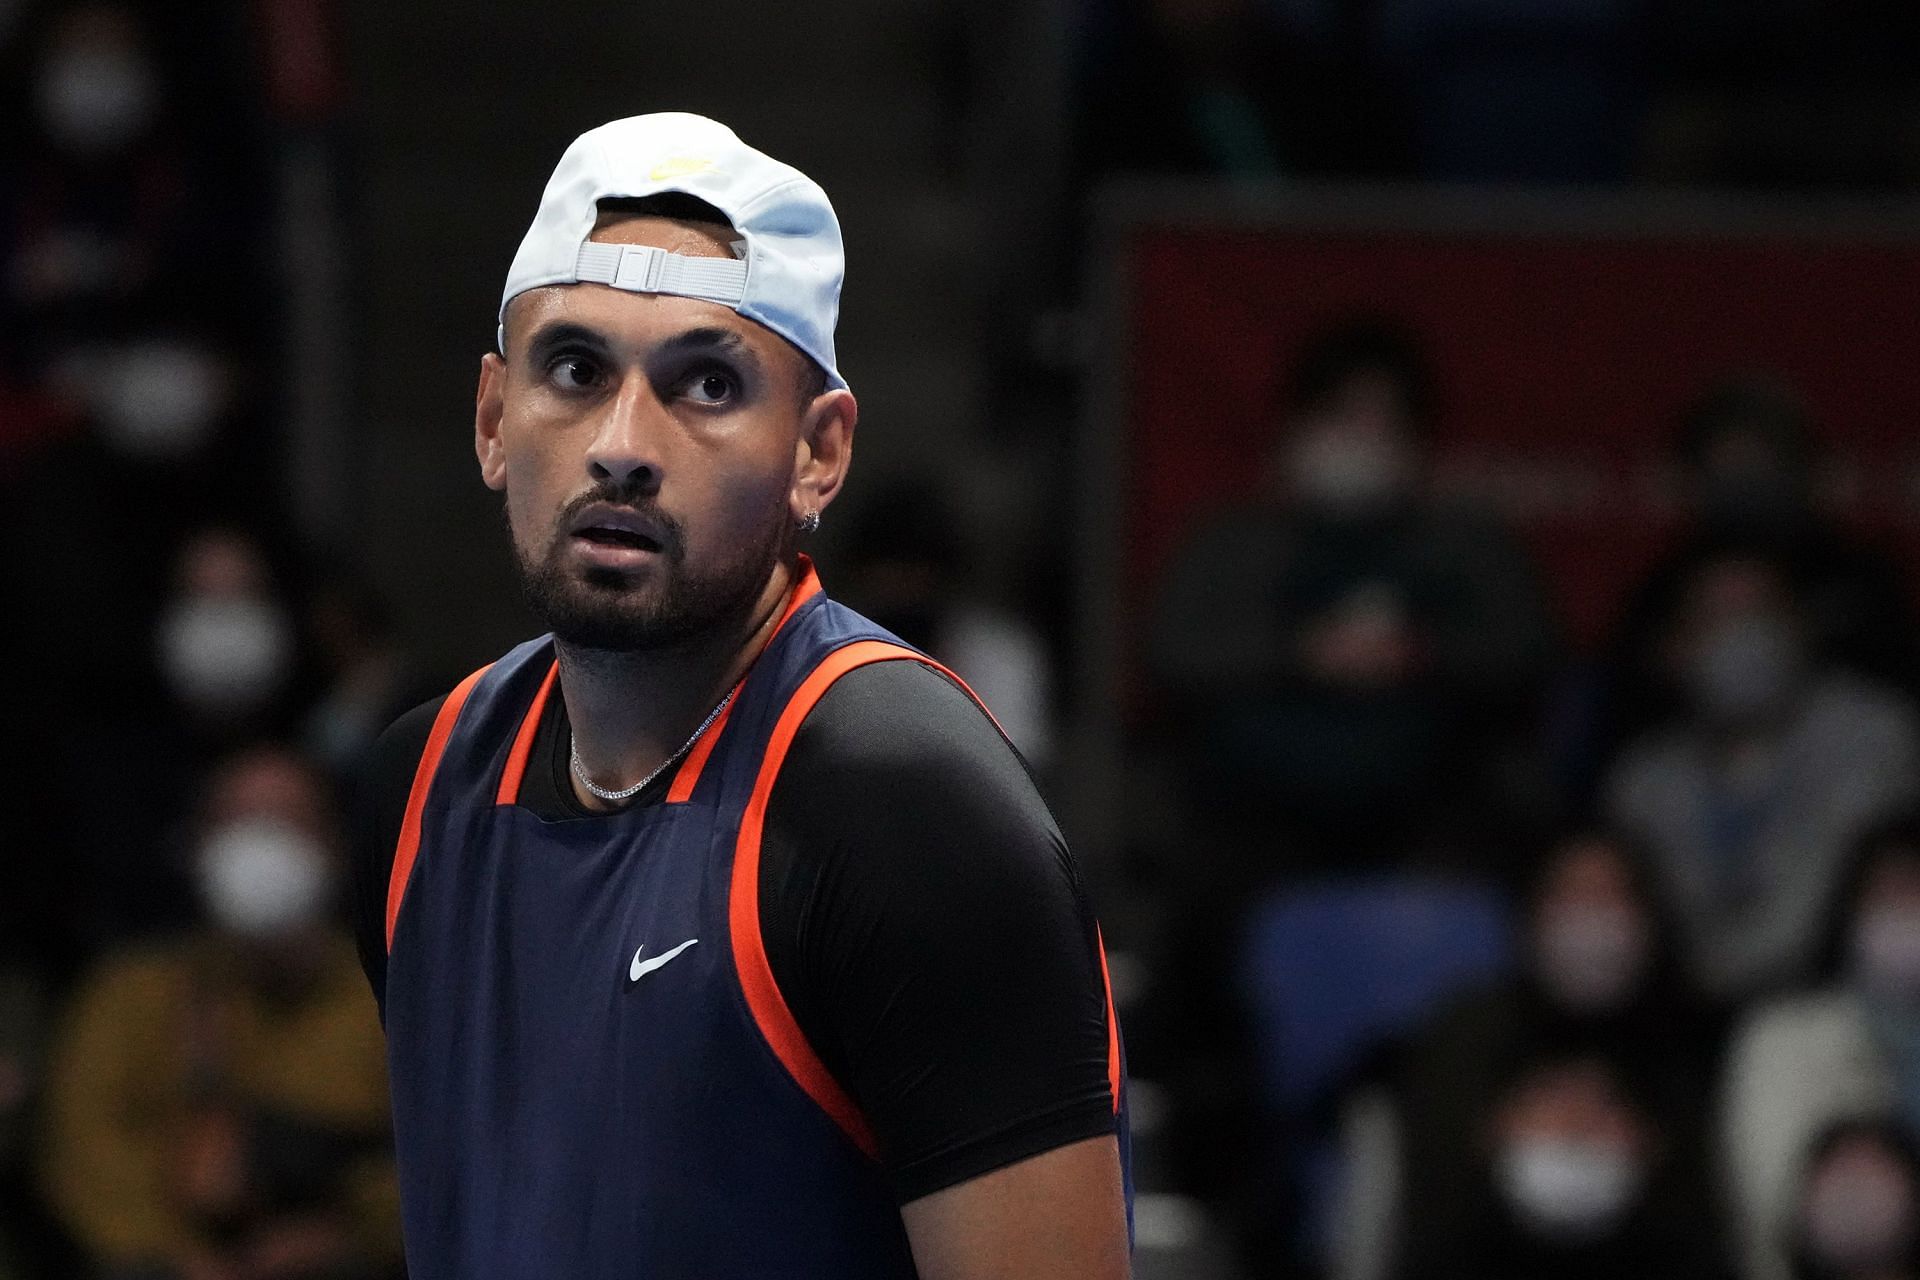 Nick Kyrgios is currently ranked 21st in the world.